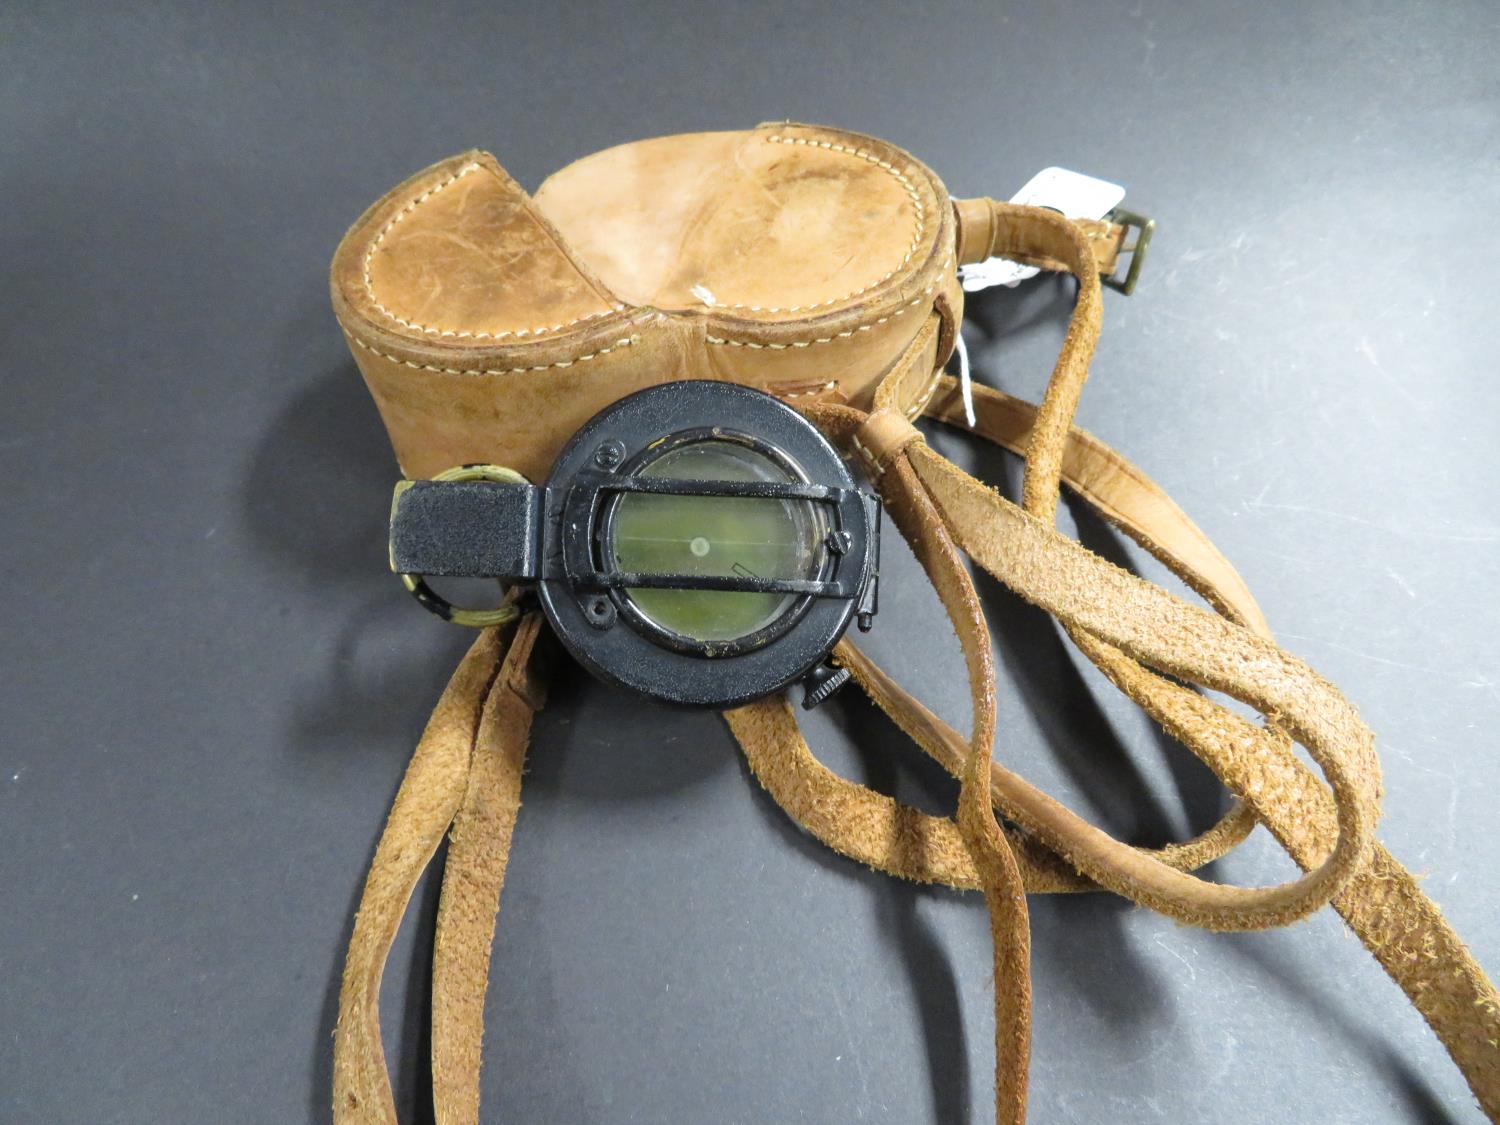 Military Compass on leather case with straps